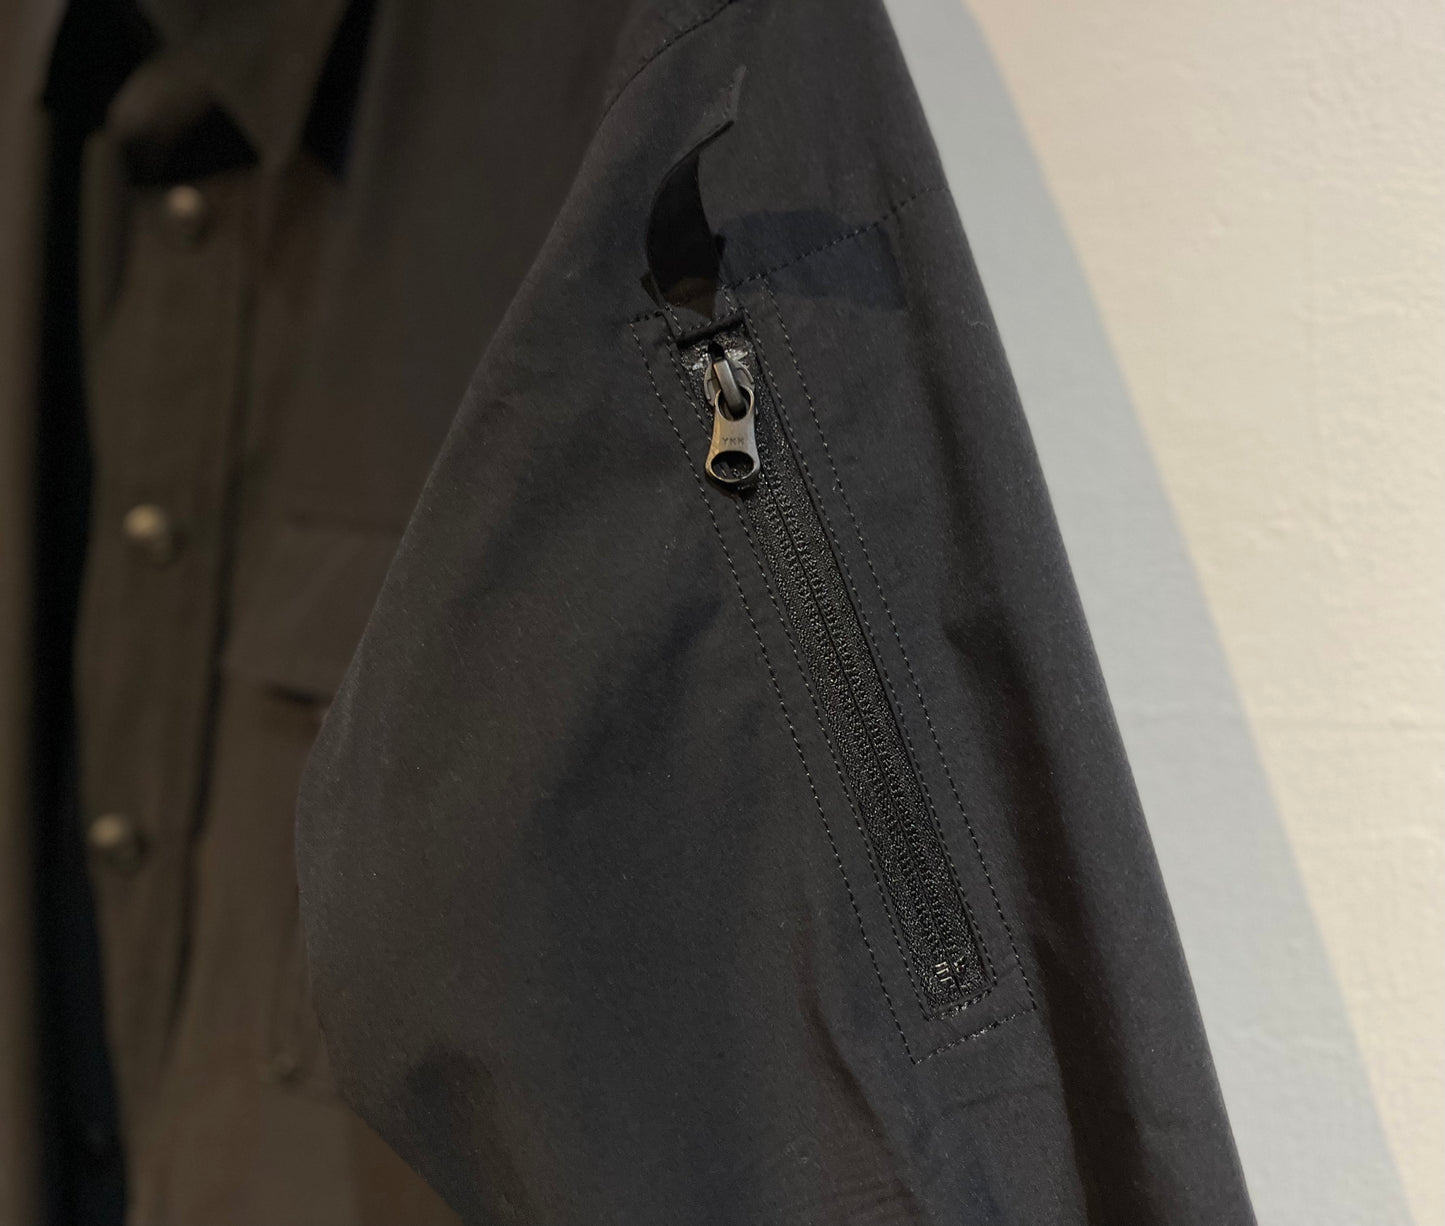 24SS MOUT RECON TAILOR / マウトリーコンテーラー "MT1504 FIRE-RESISTANT TRAUMA SHIRT"